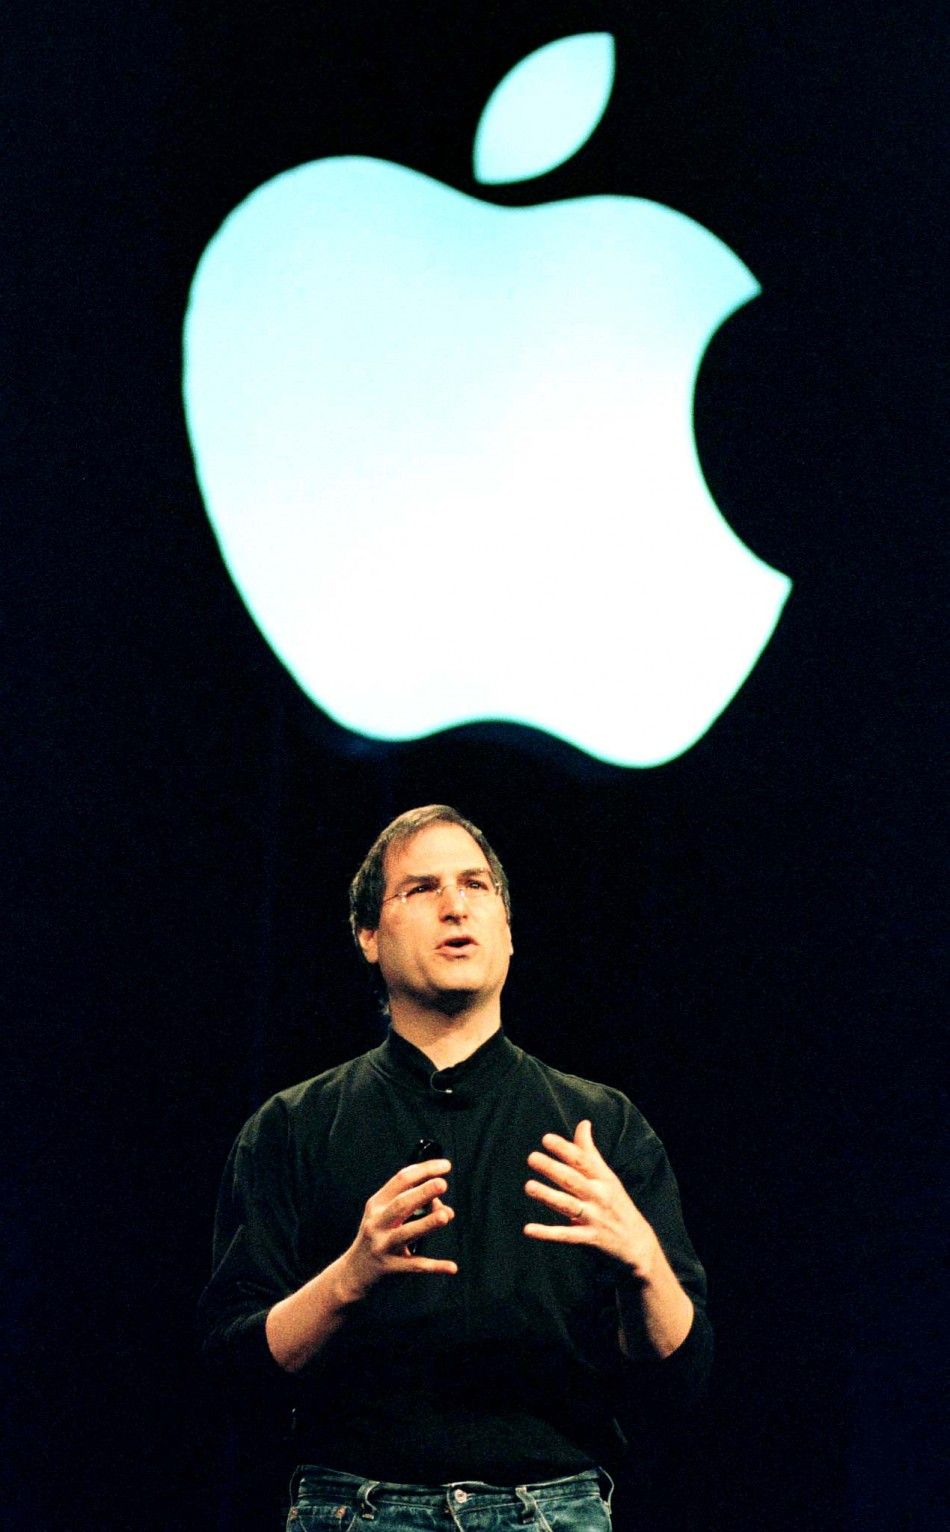 Steve Jobs, interim CEO of Apple Computer, Inc., talks about Apples software strategy and development at Apples Worldwide Developers Conference at the San Jose Convention Center